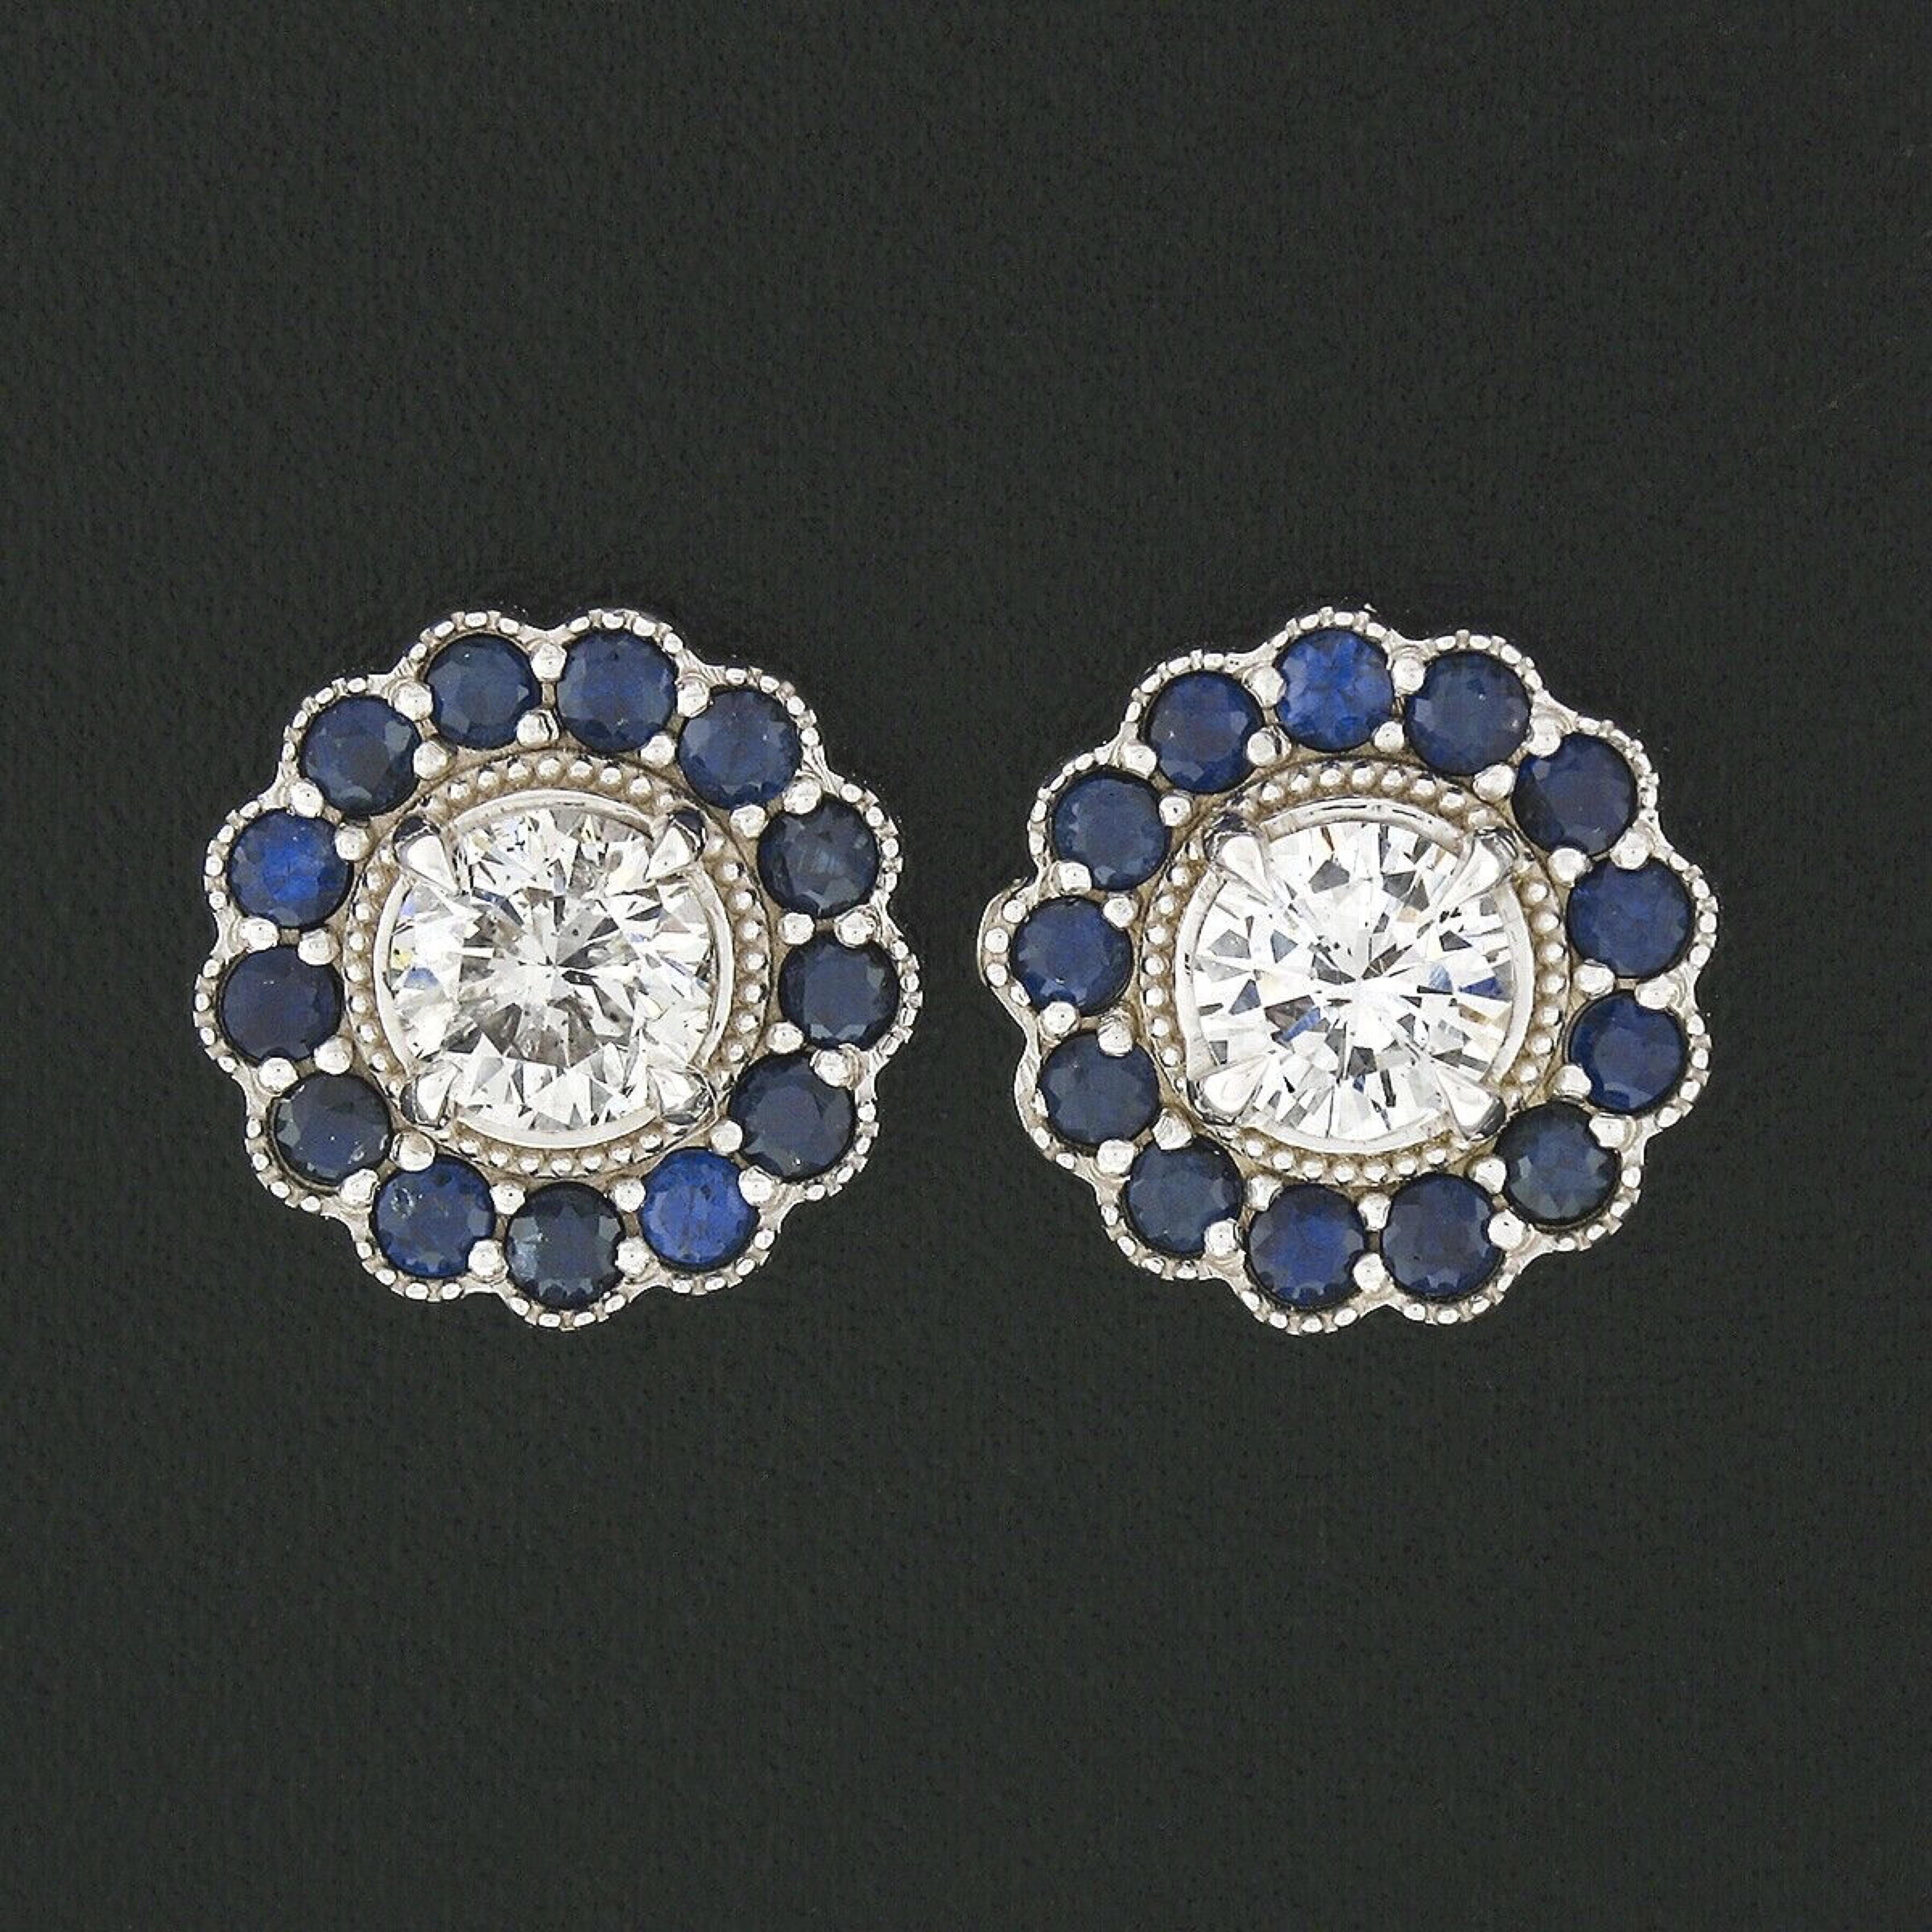 This is an absolutely gorgeous pair of diamond and sapphire cluster flower earrings that very well crafted in solid 14k white gold. Each earring features a round brilliant prong set diamond at its center with a halo of very fine royal blue